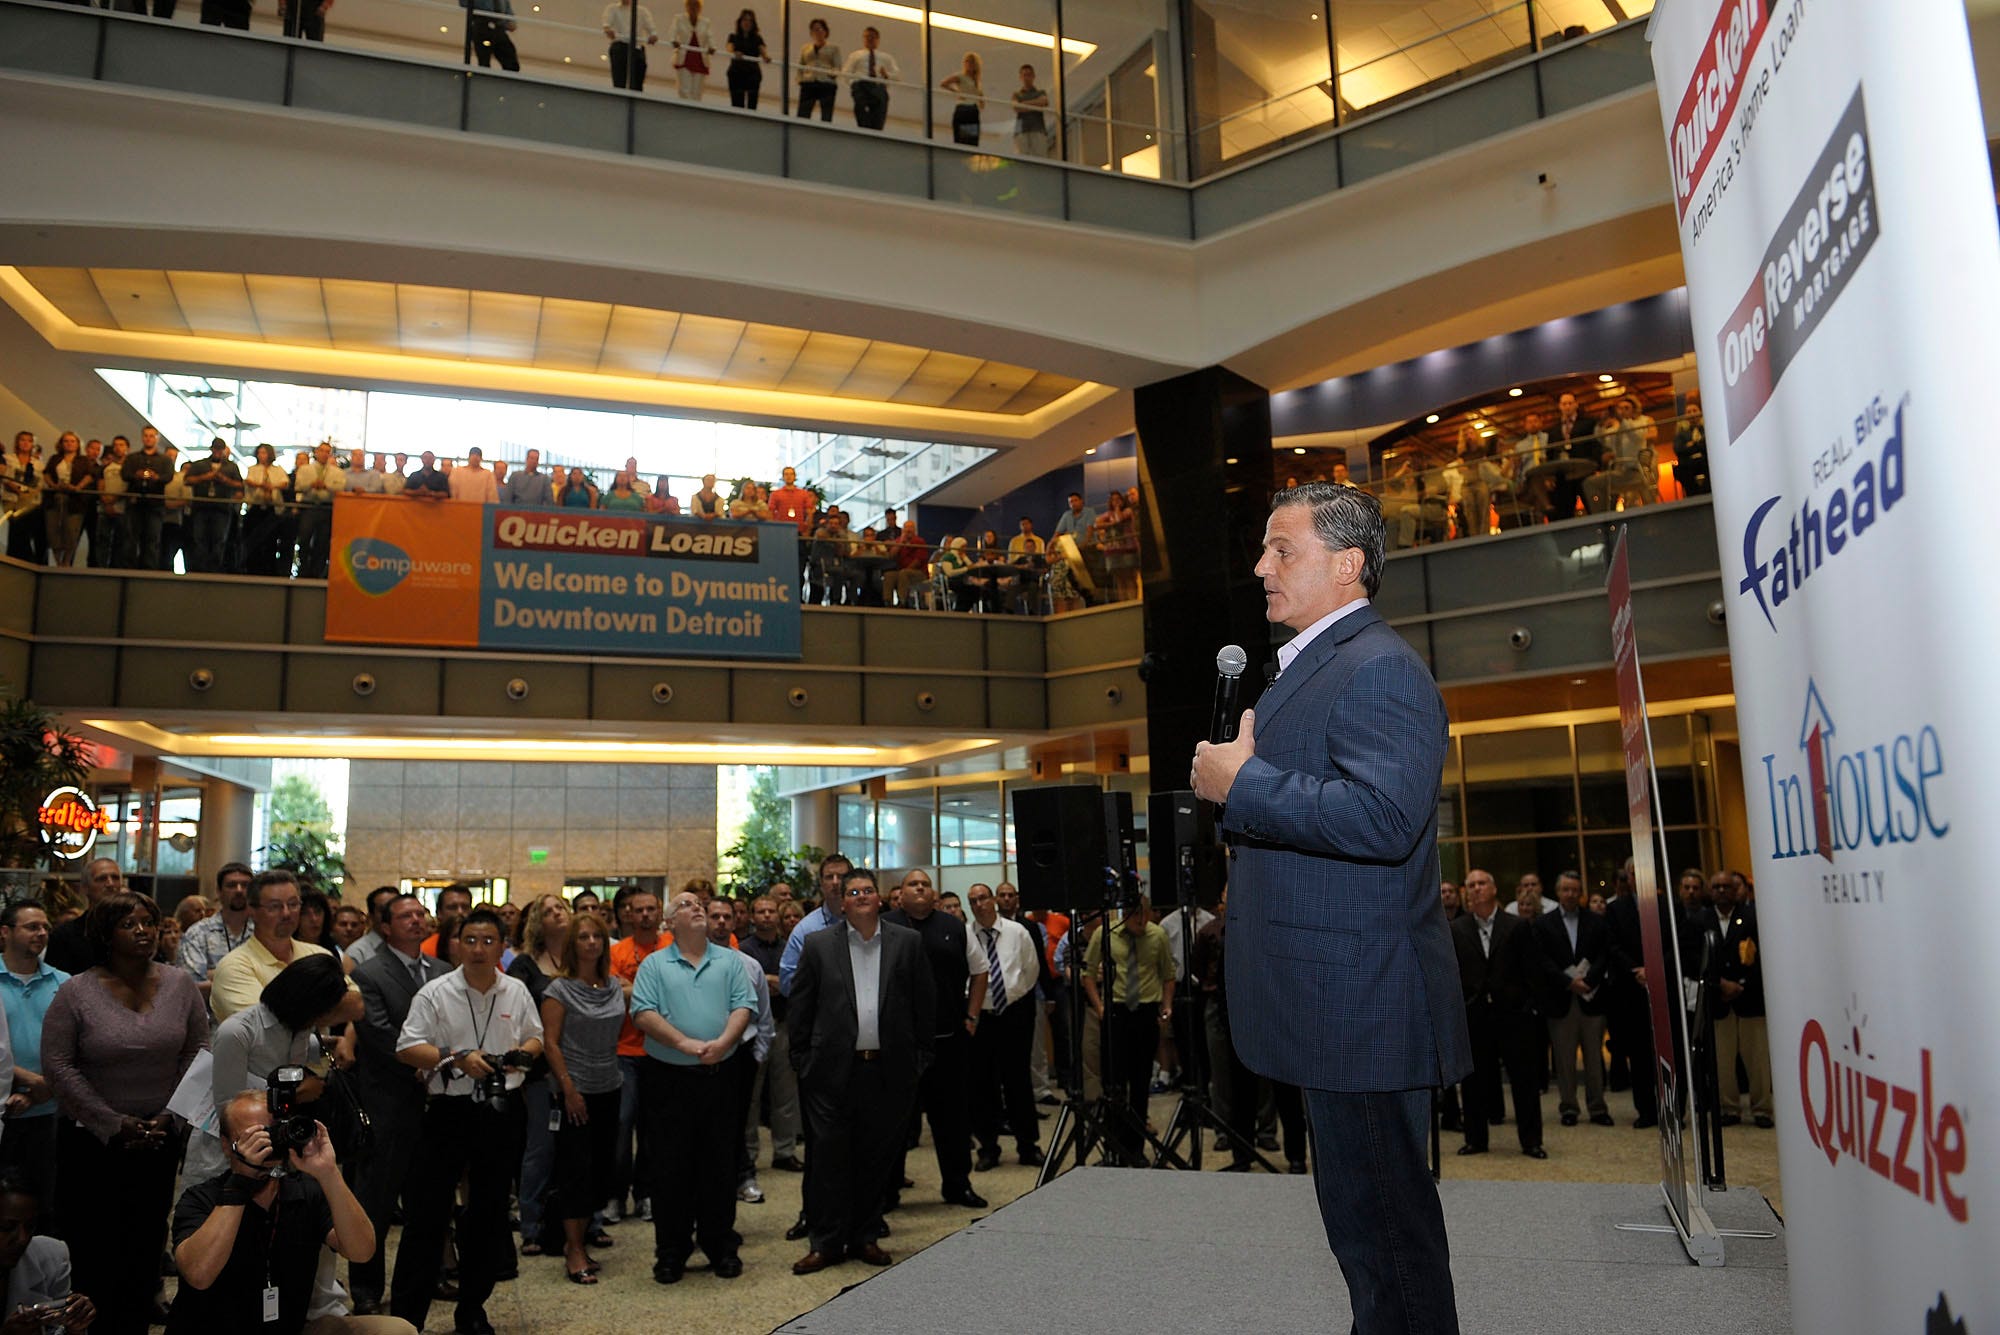 Dan Gilbert, founder and chairman of Quicken Loans, addresses his employees during a press conference at the Compuware building, August 16, 2010.